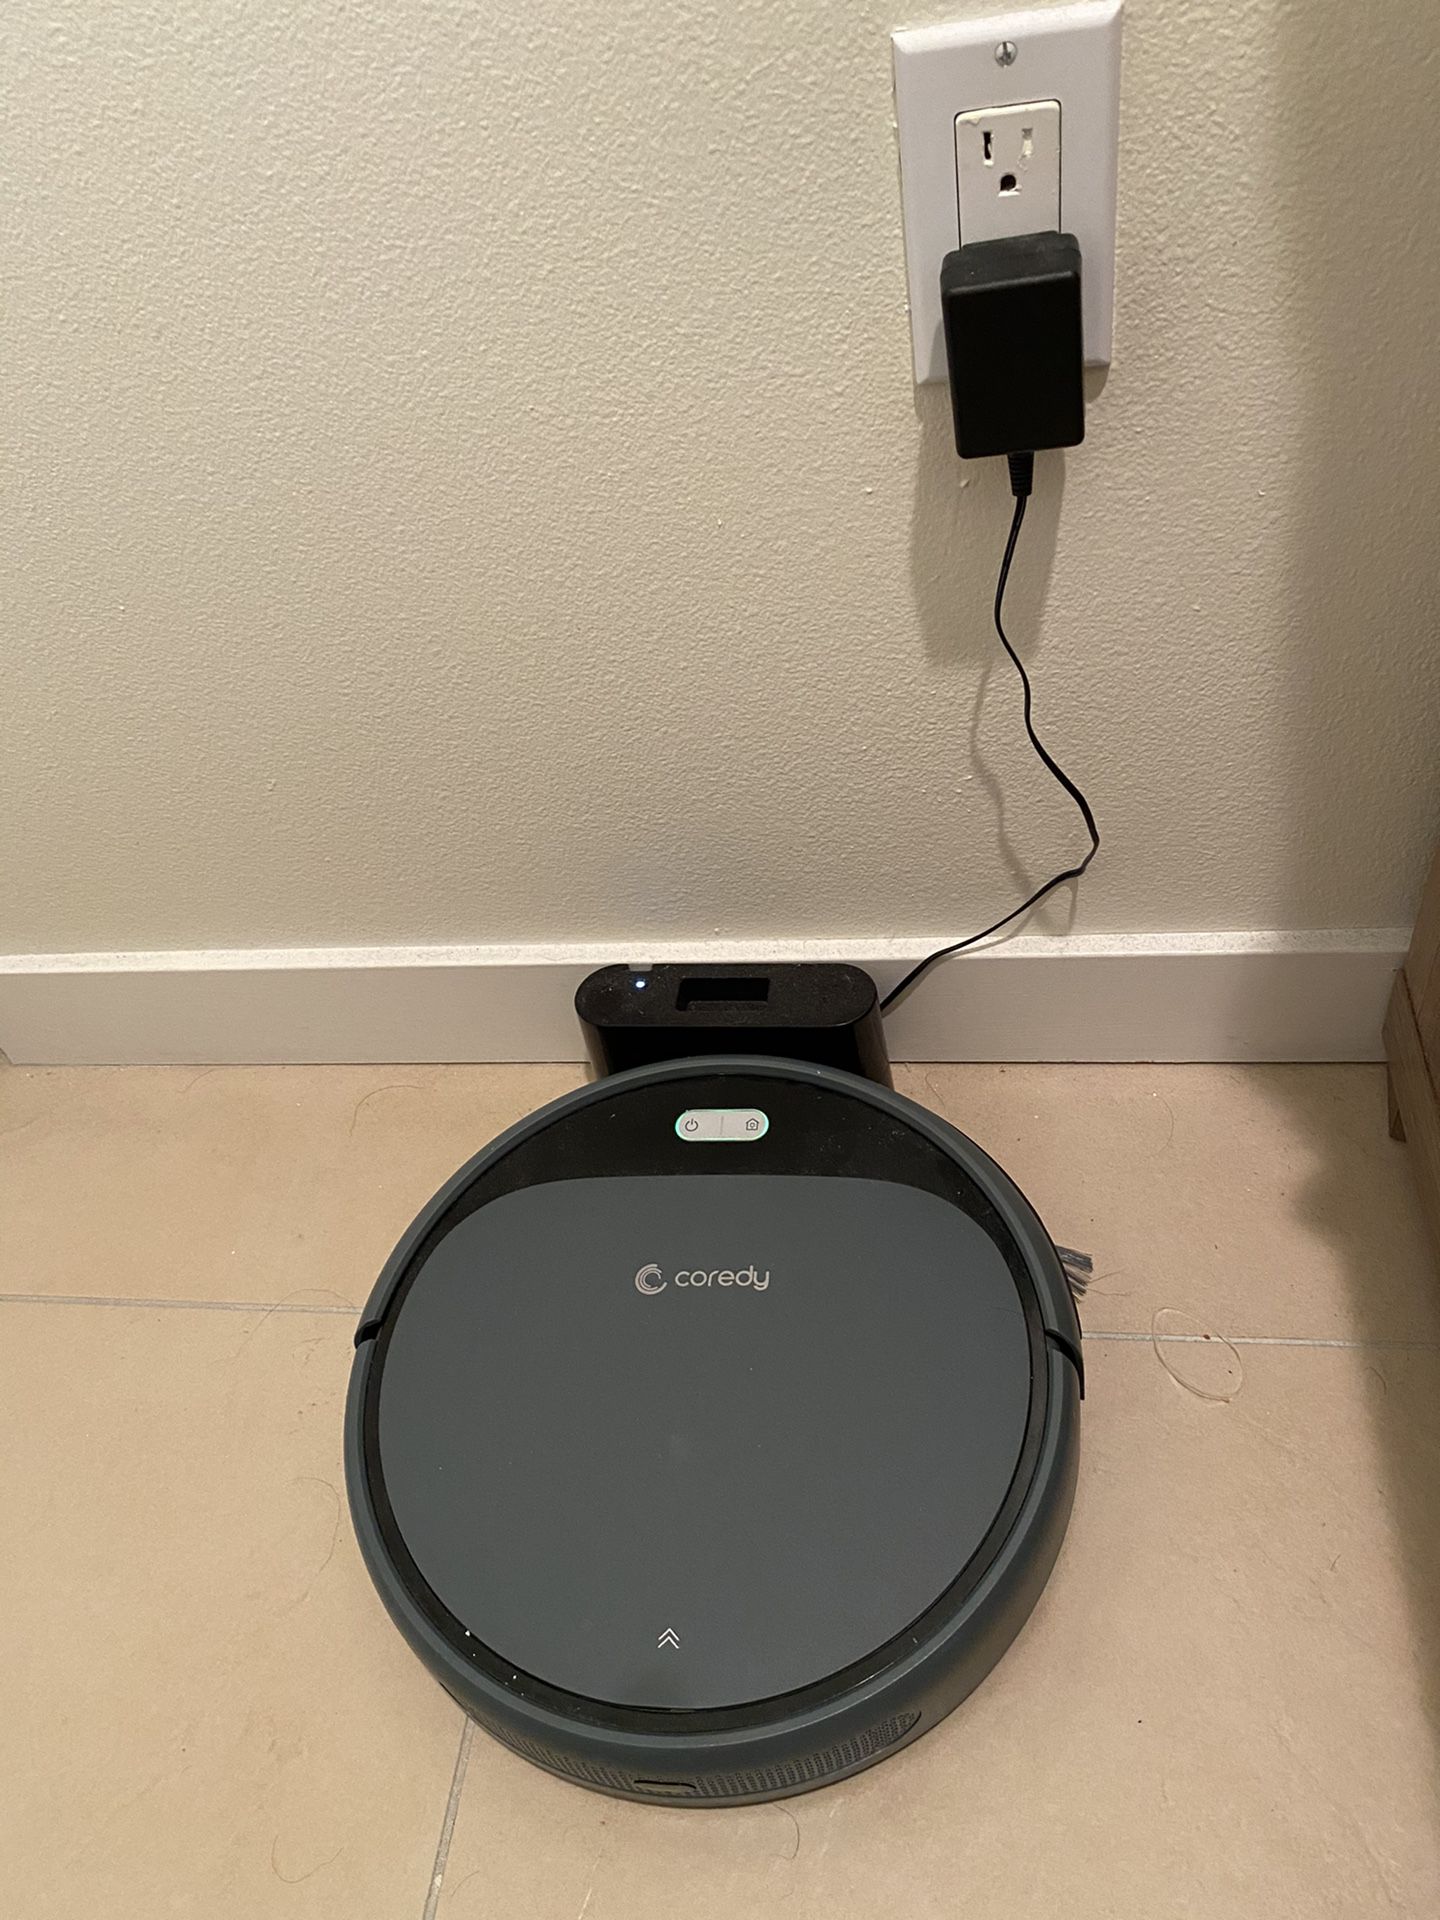 Coreby Coredy Robot Vacuum Cleaner- used less then 6 months, with original box and parts